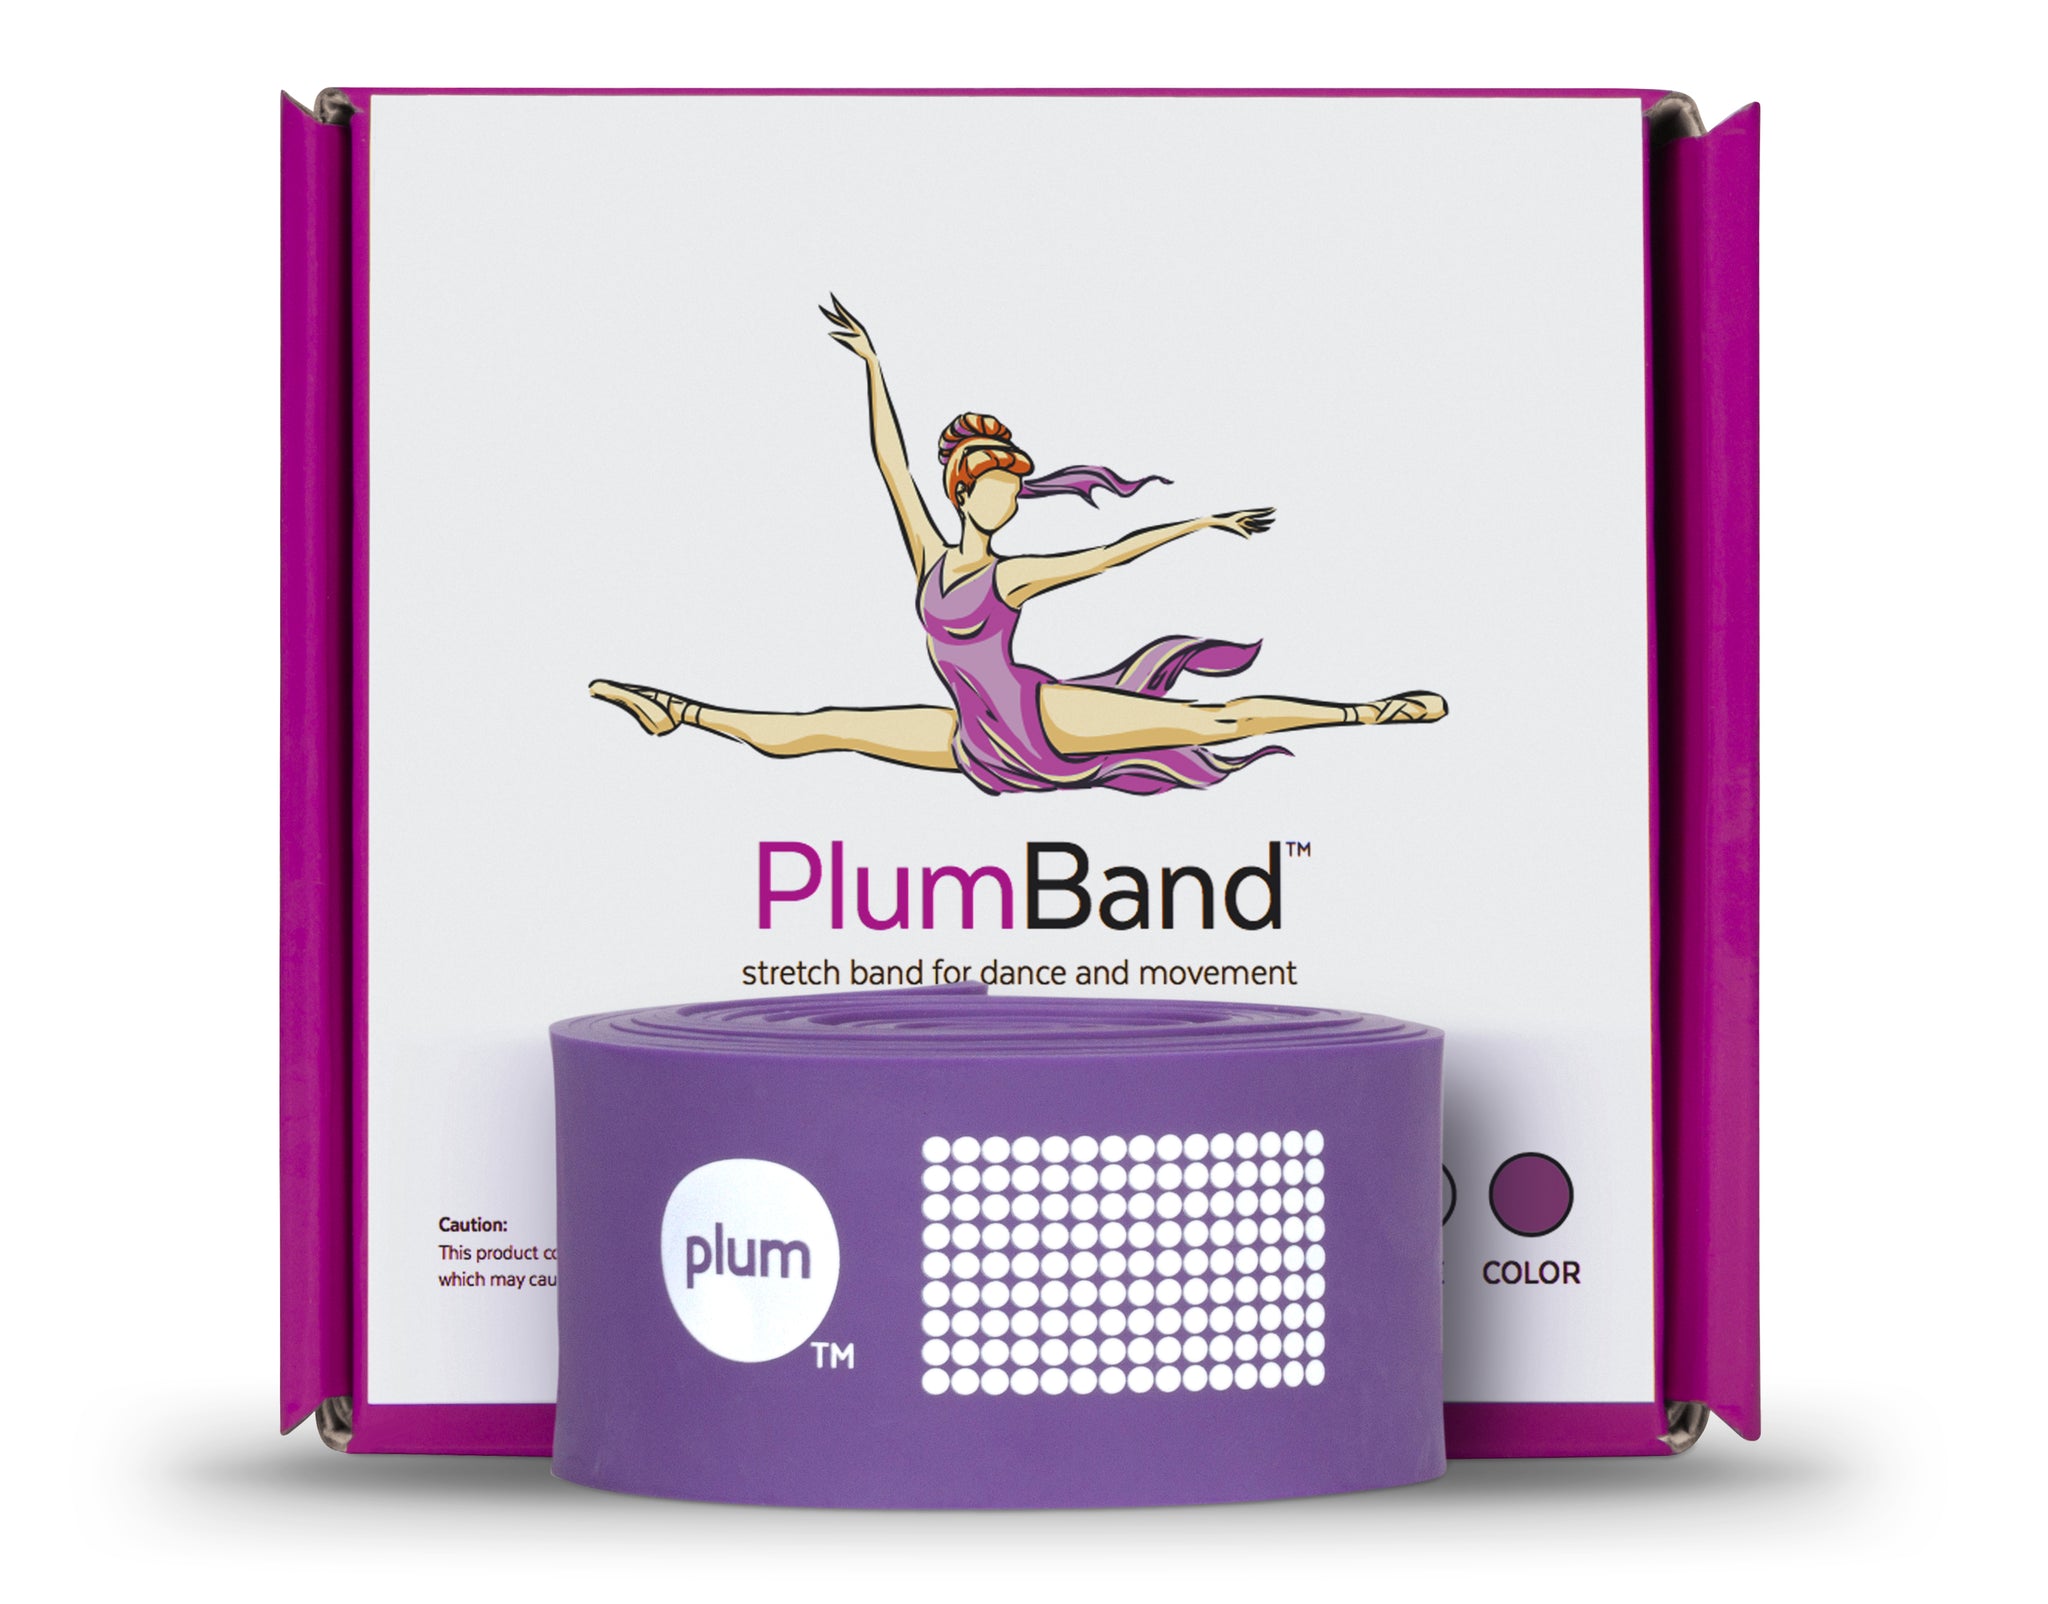 The PlumBand® stretch band